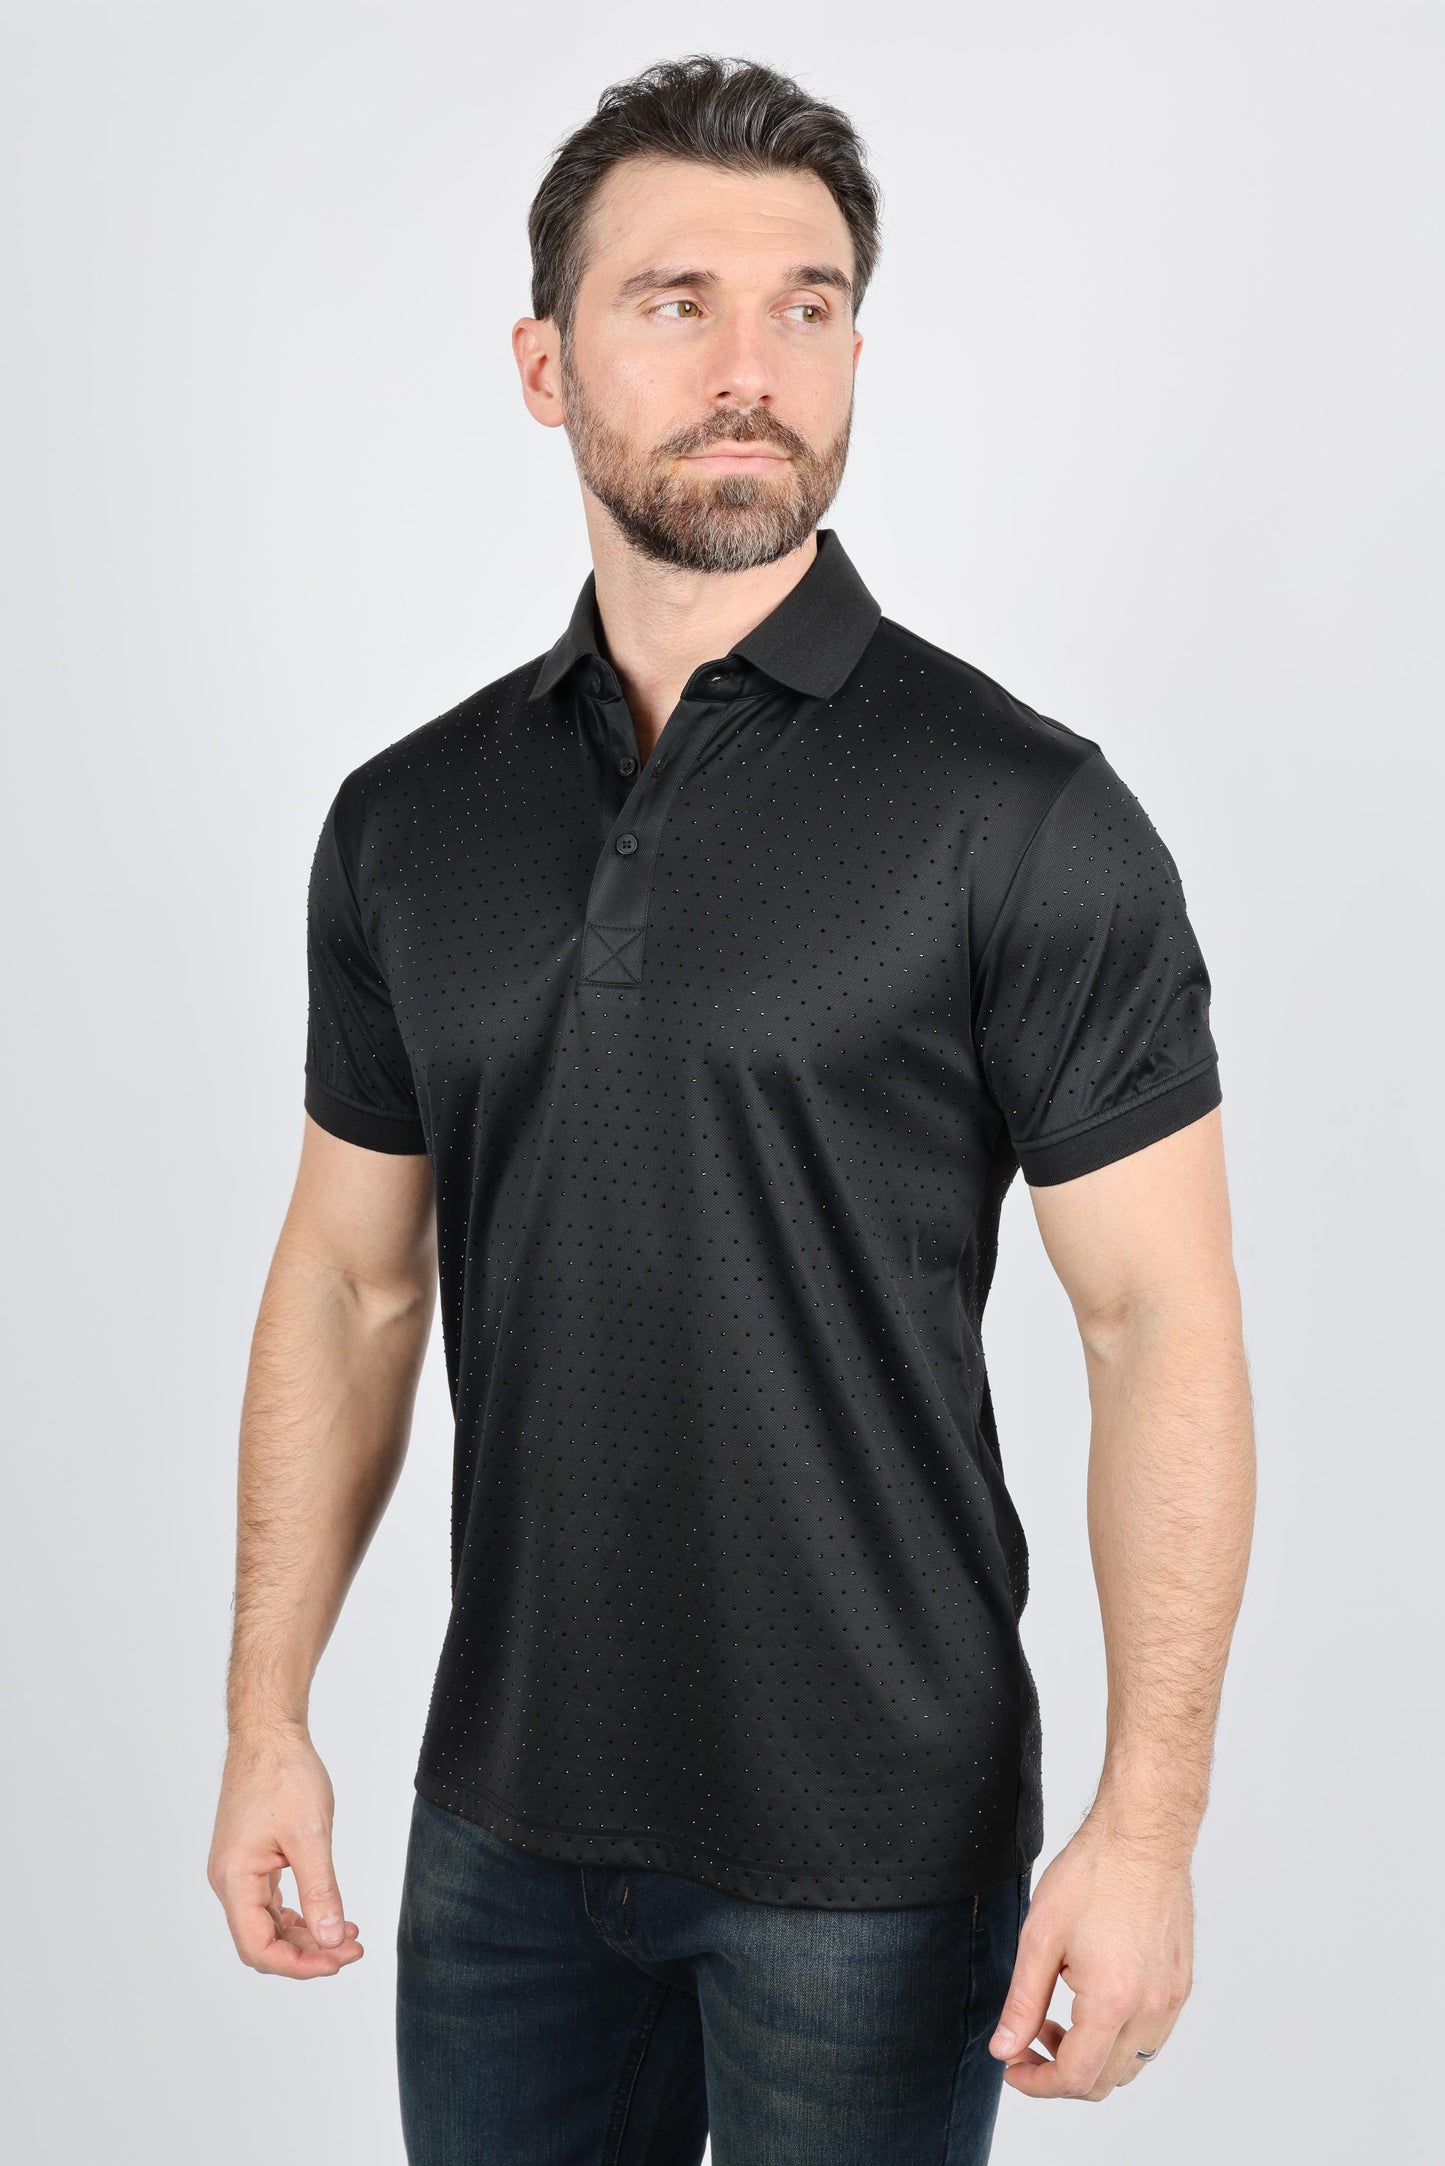 Mens Modern Fit Stretch Full Body Crystals Polo